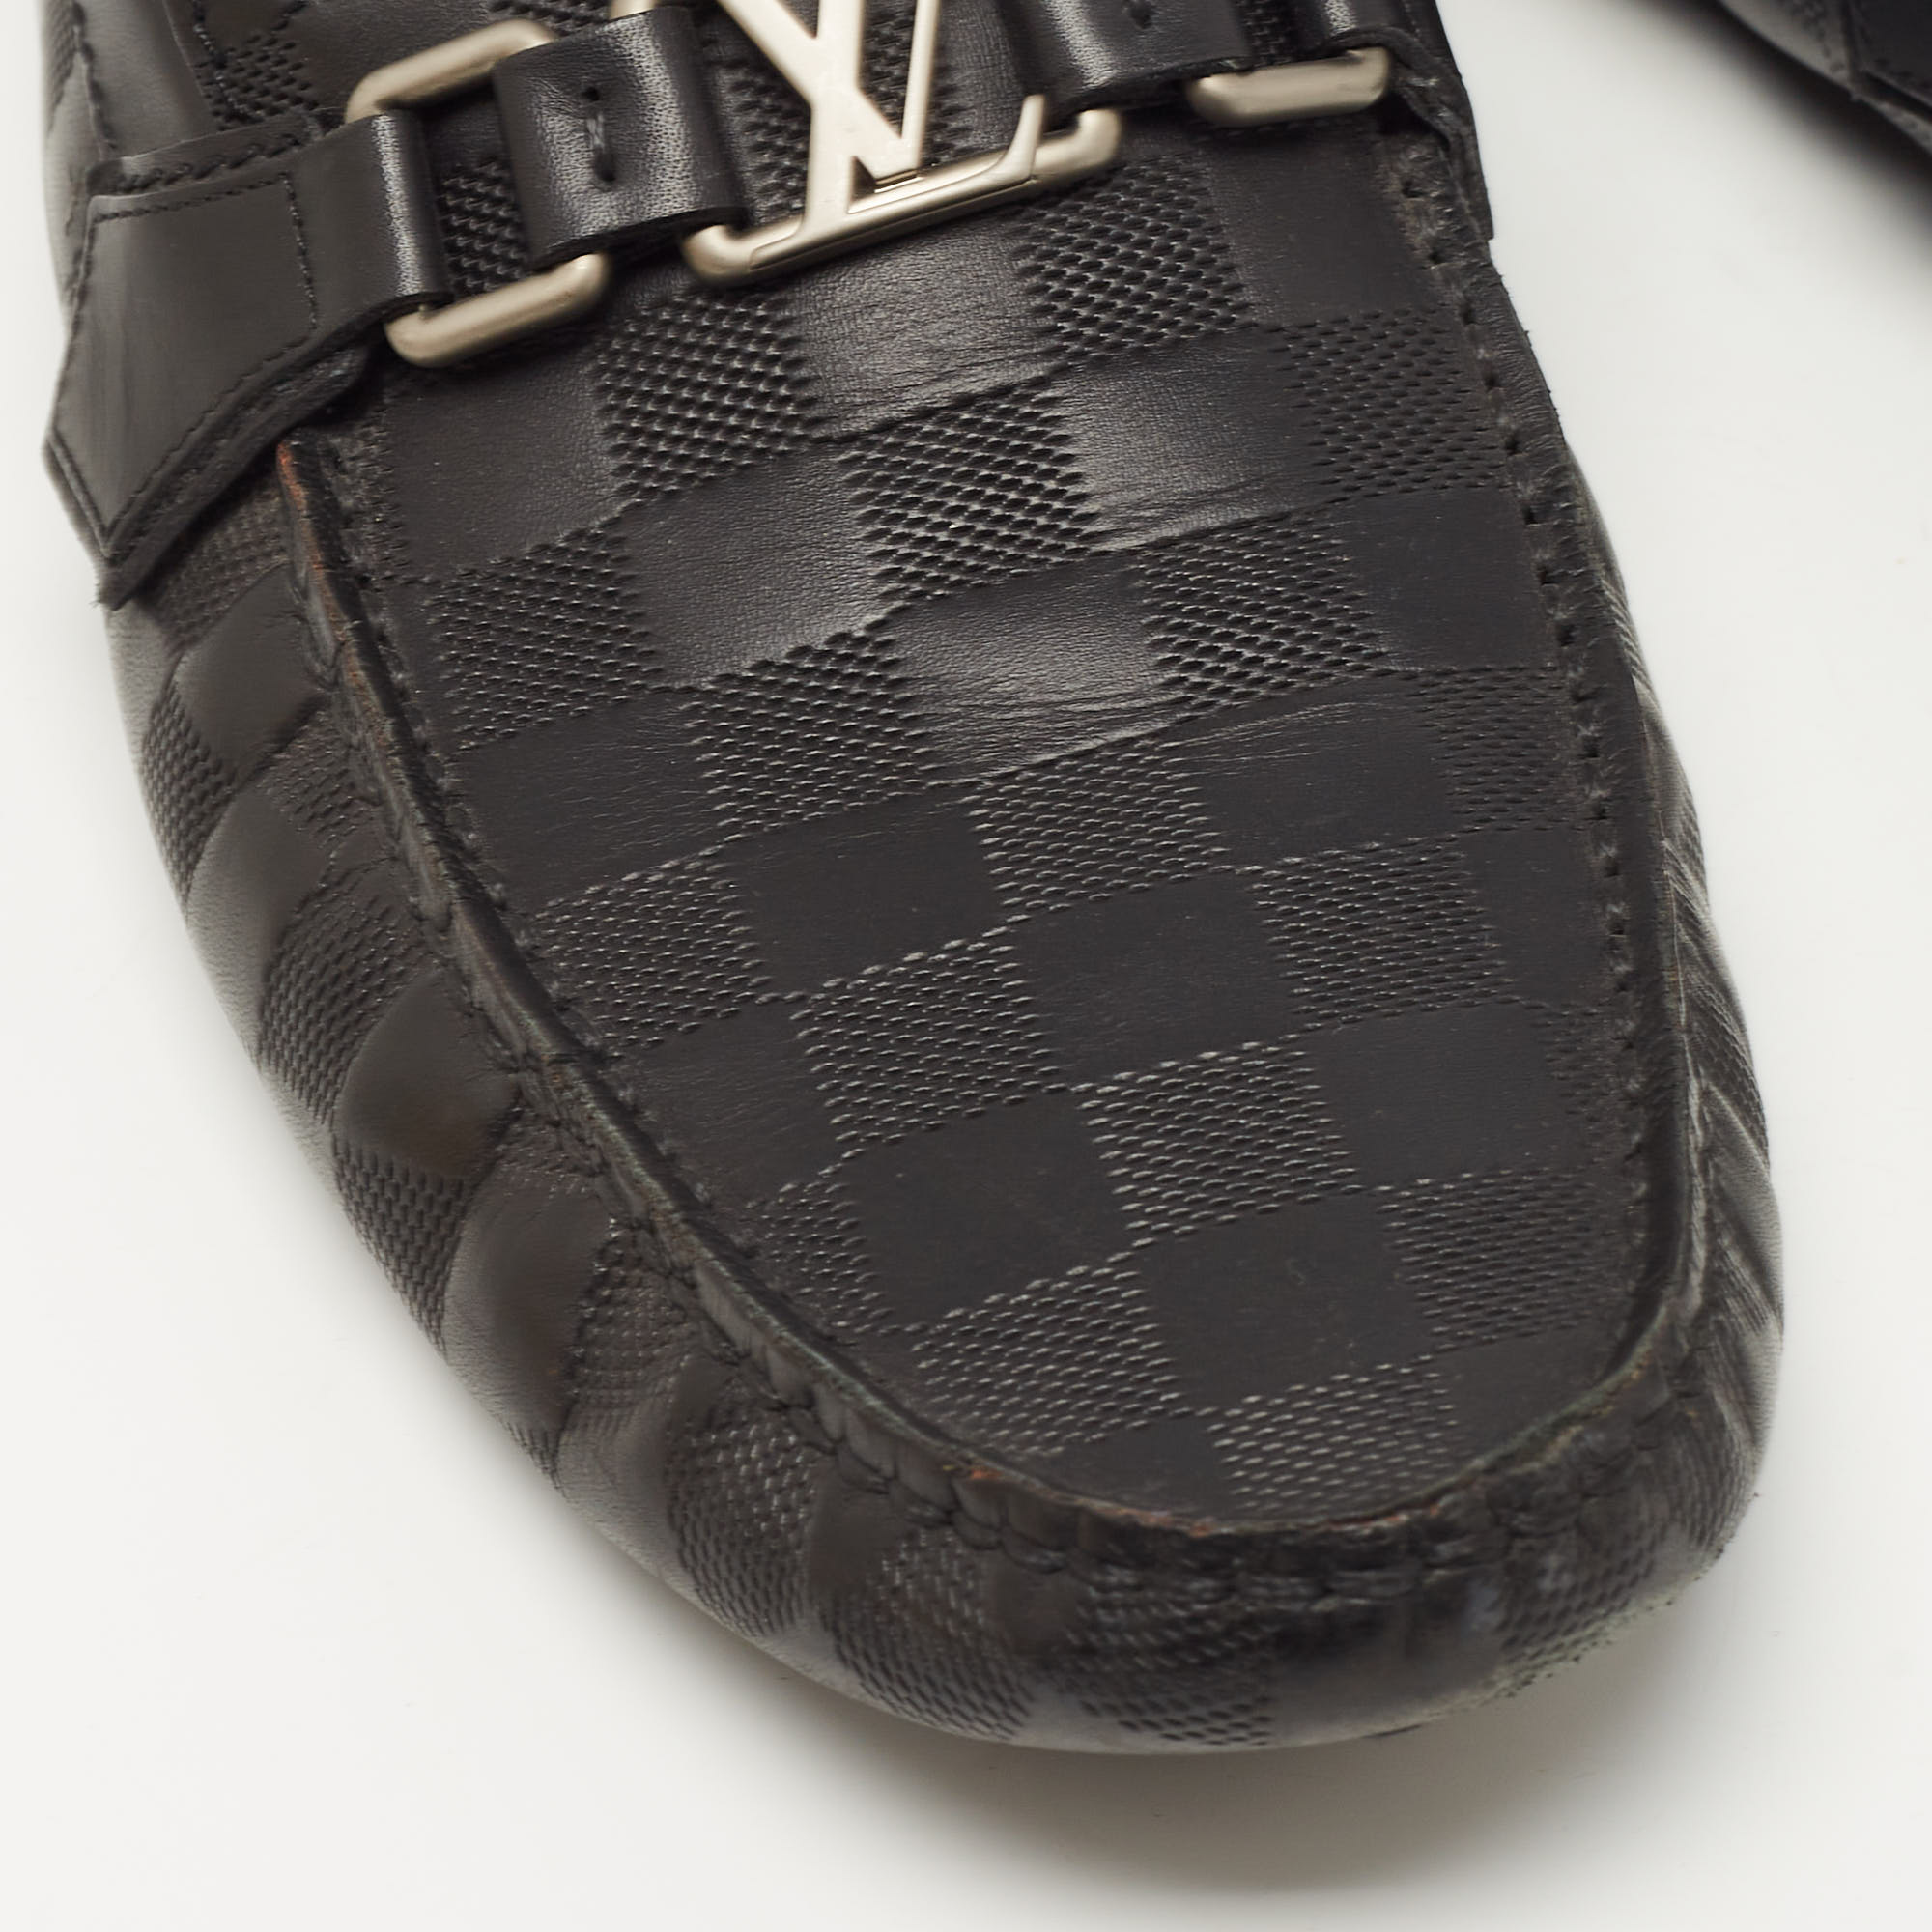 Louis Vuitton Black Damier Embossed Leather Hockenheim Loafers Size 43